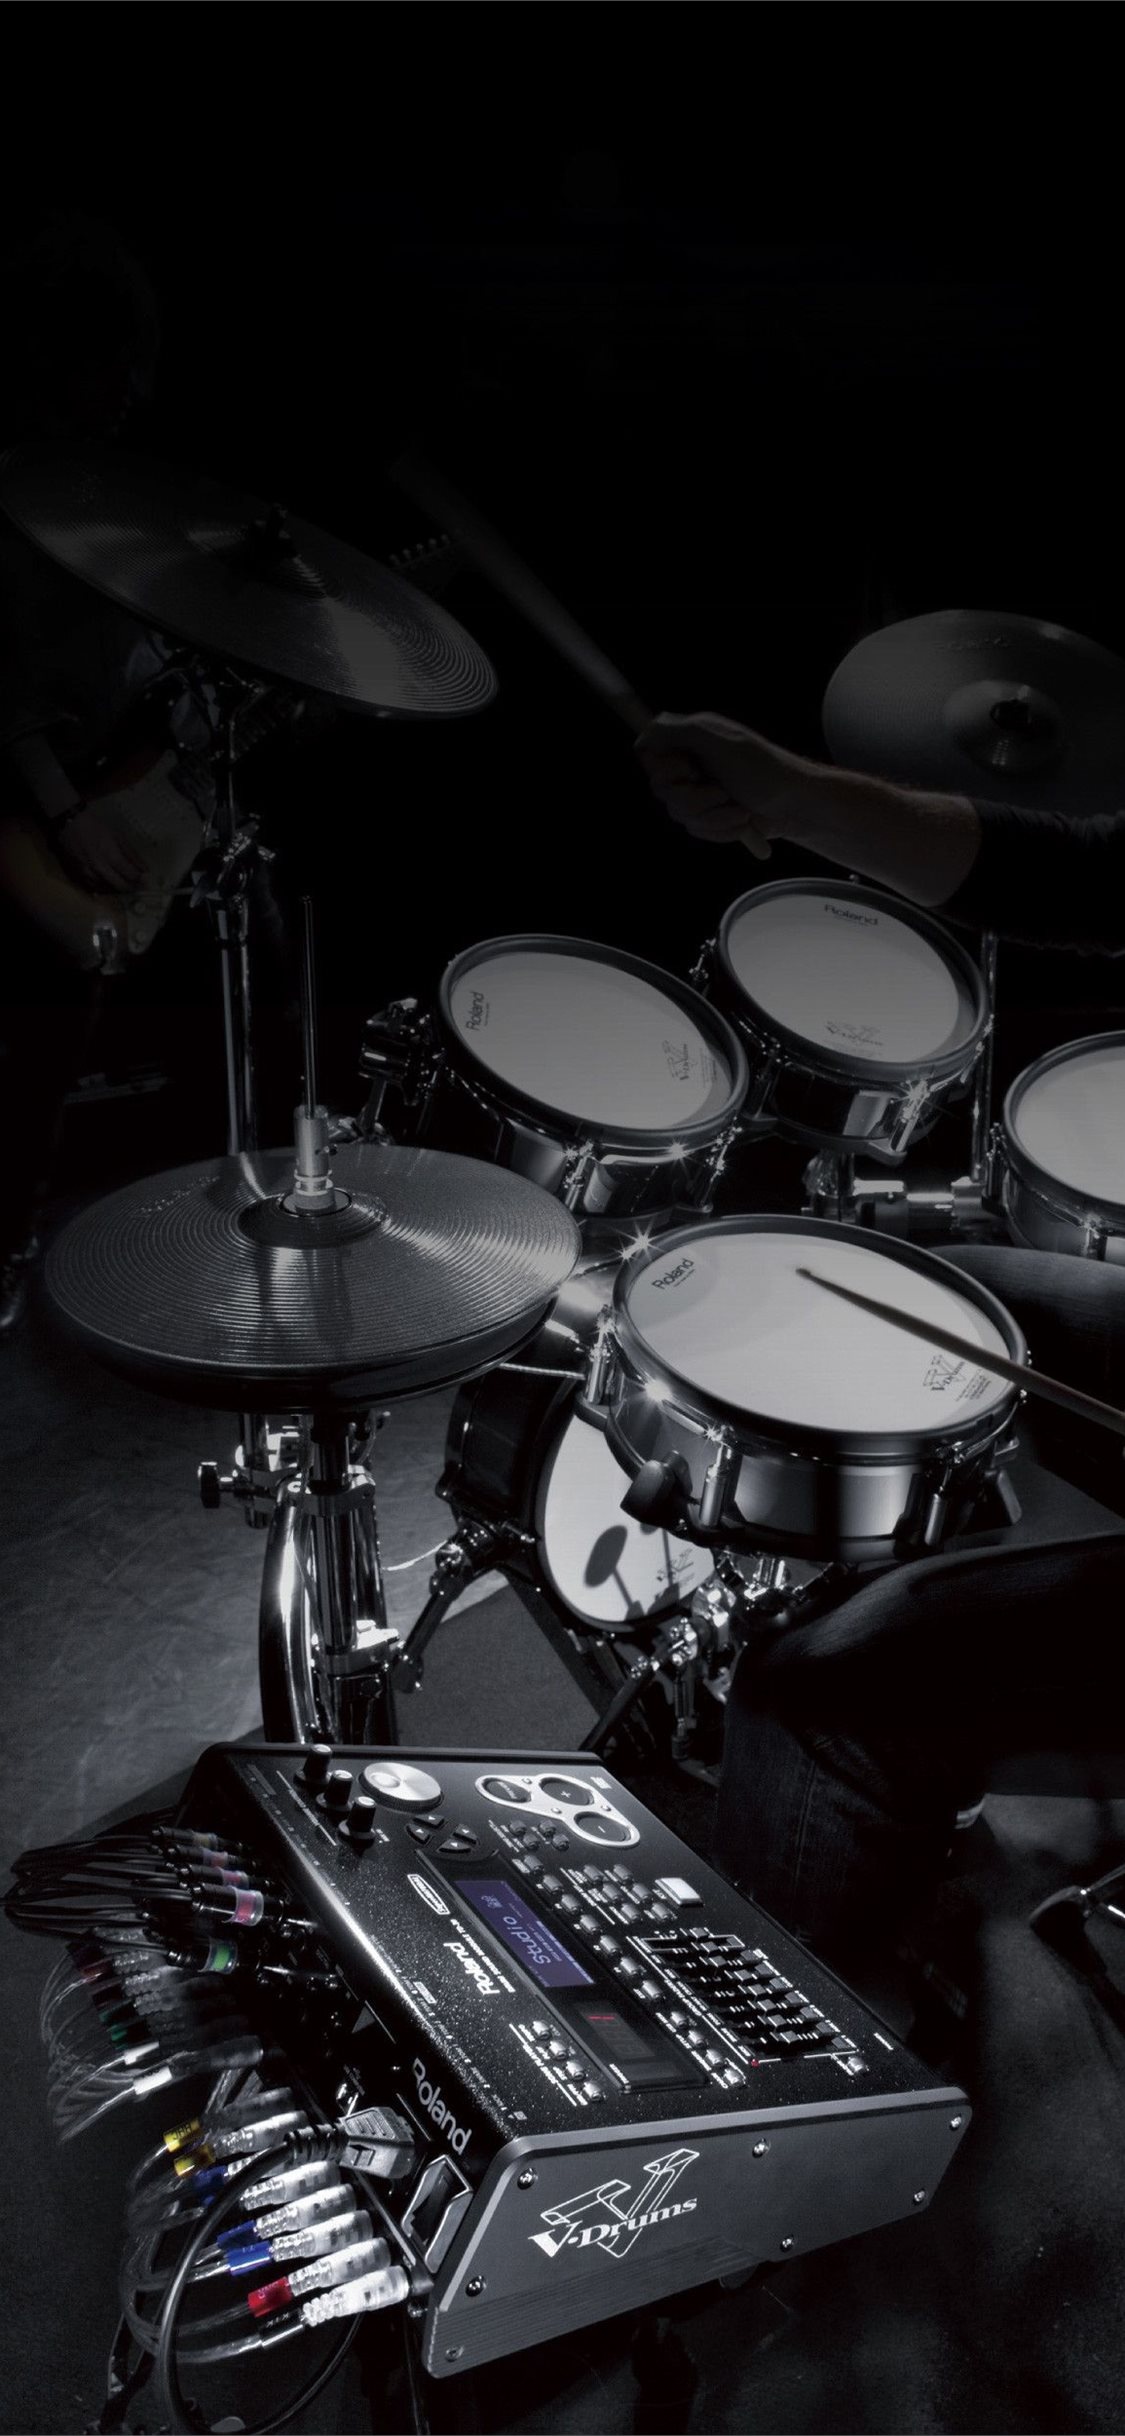 Drums: Sound Recording Equipment, Sound Remote And Mixer. 1130x2440 HD Wallpaper.